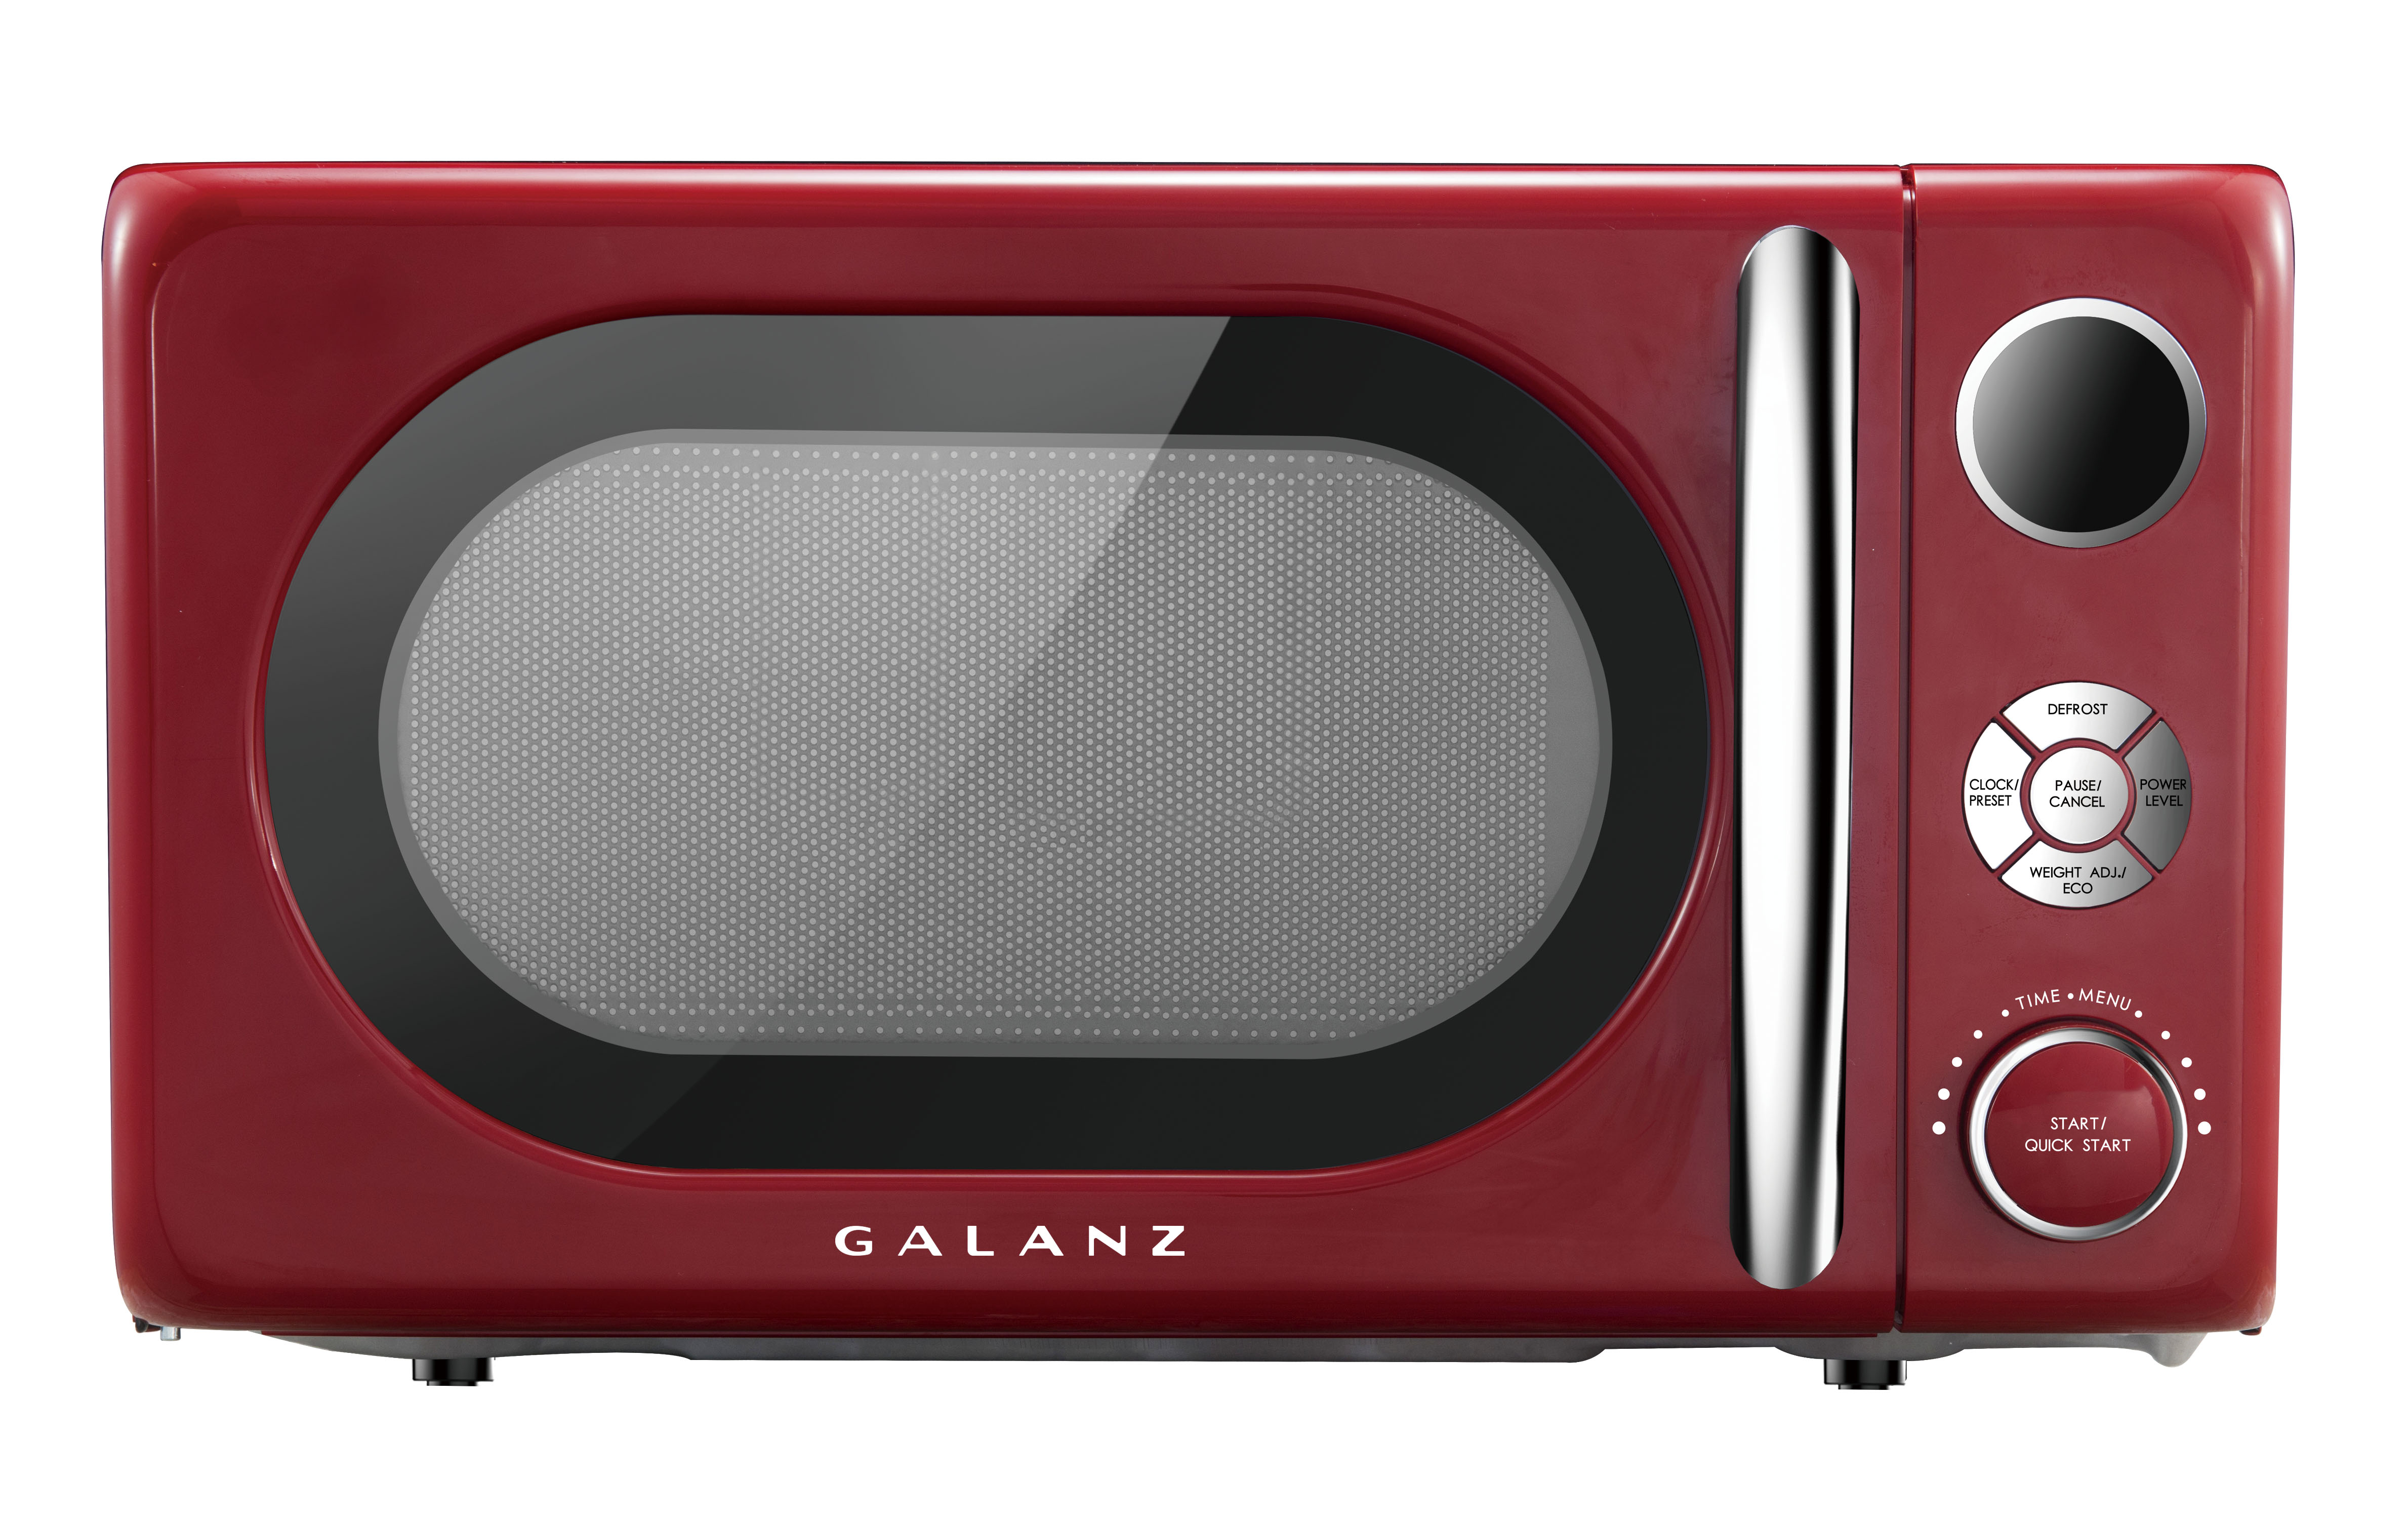 Galanz GLCMKA07RDR-07 0.7 Cu.ft Retro Countertop Microwave 700W, Red - image 1 of 4